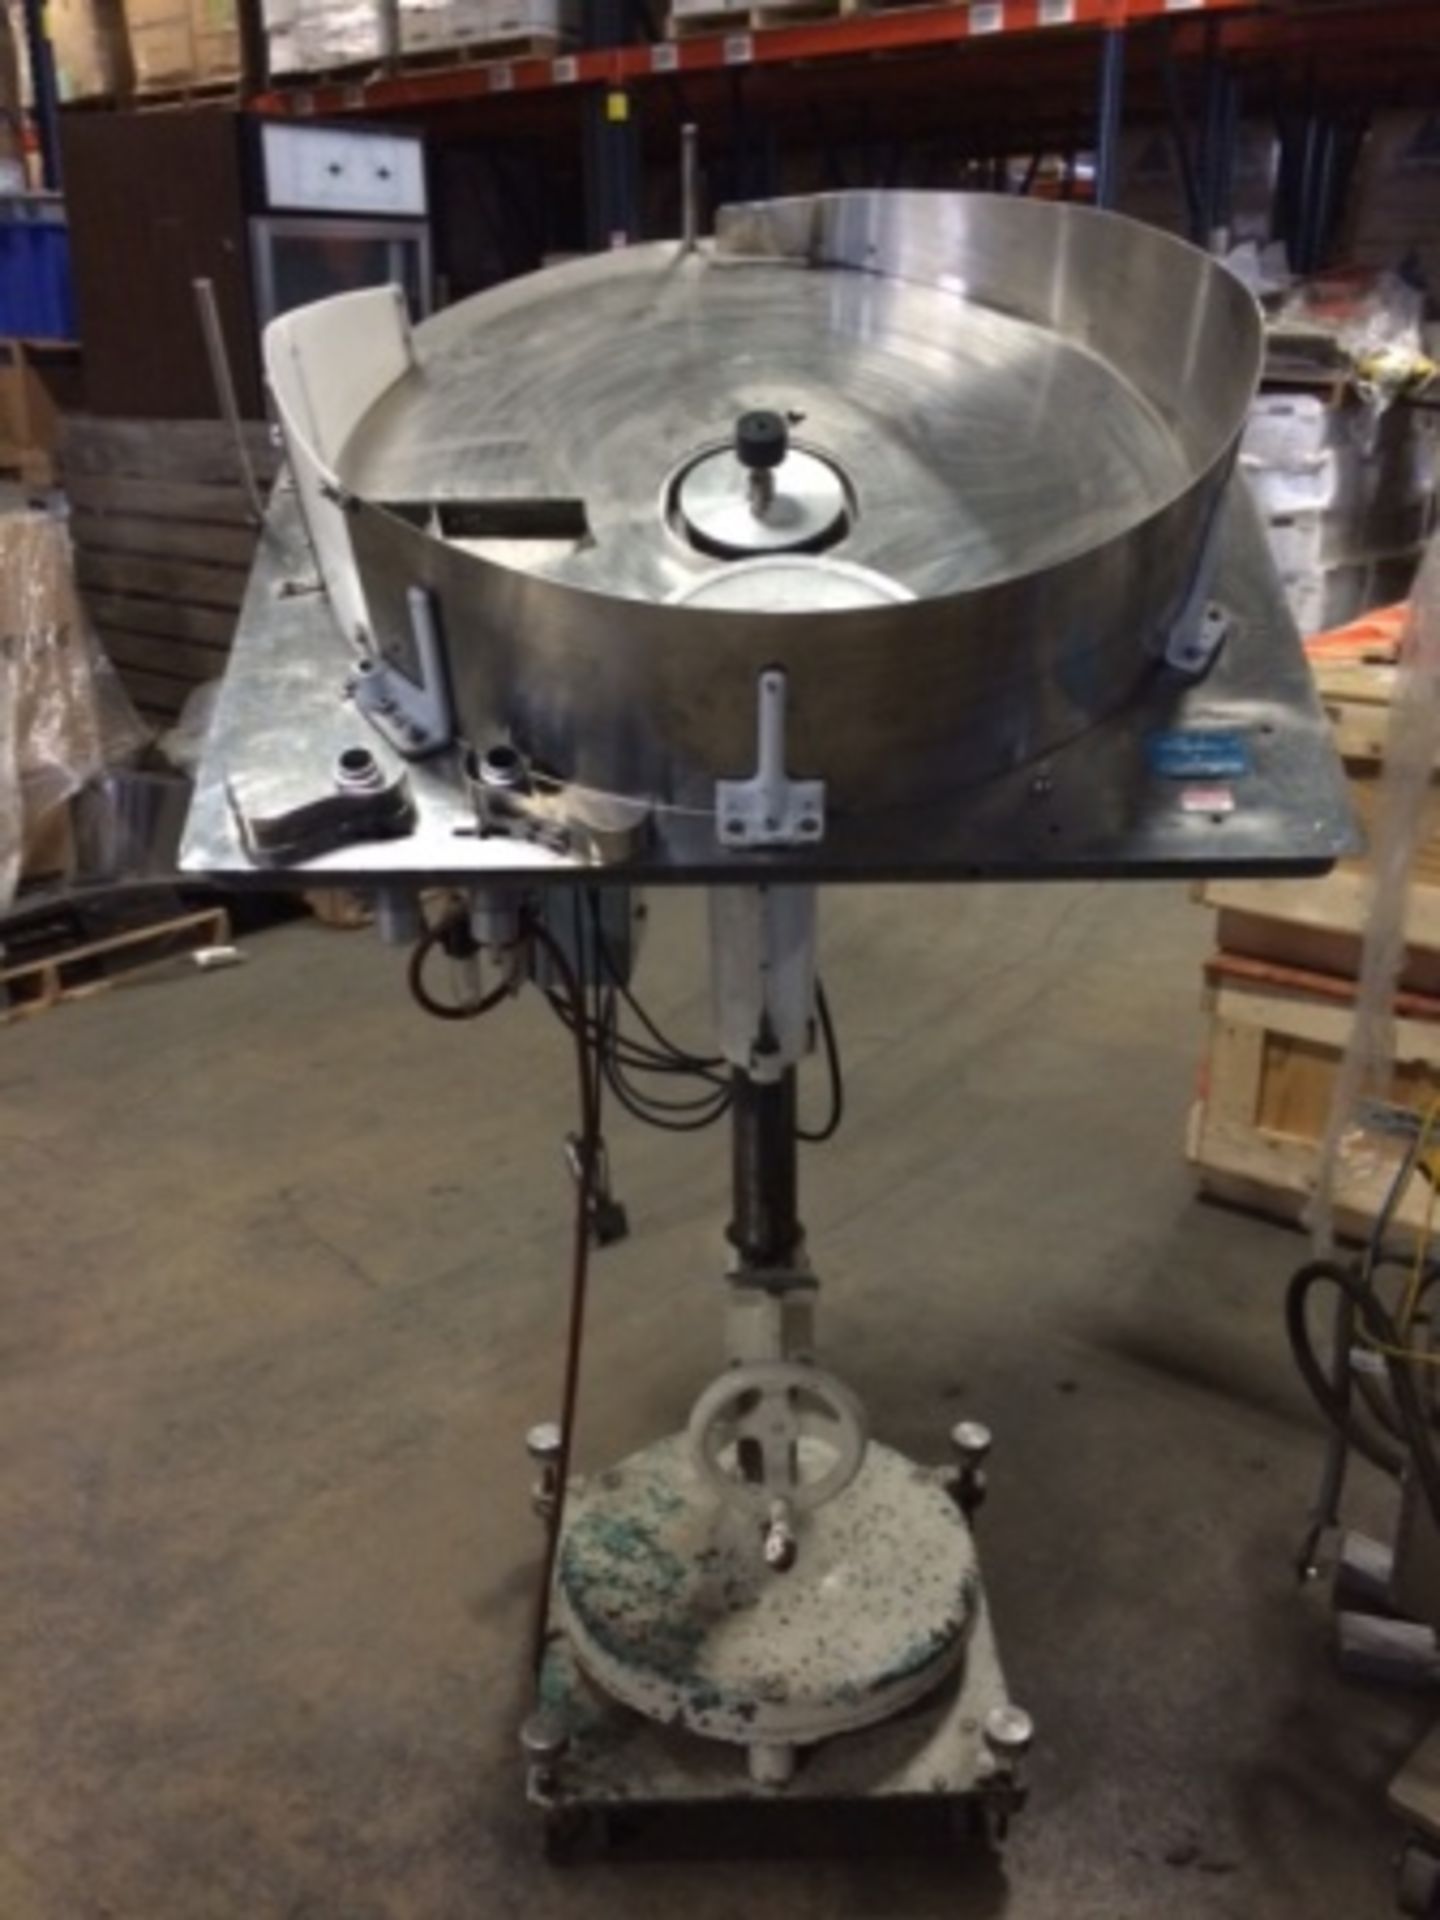 Cozzoli Disk Counter Model T423 2 drop. Unit was just removed from service and was used for Tablet